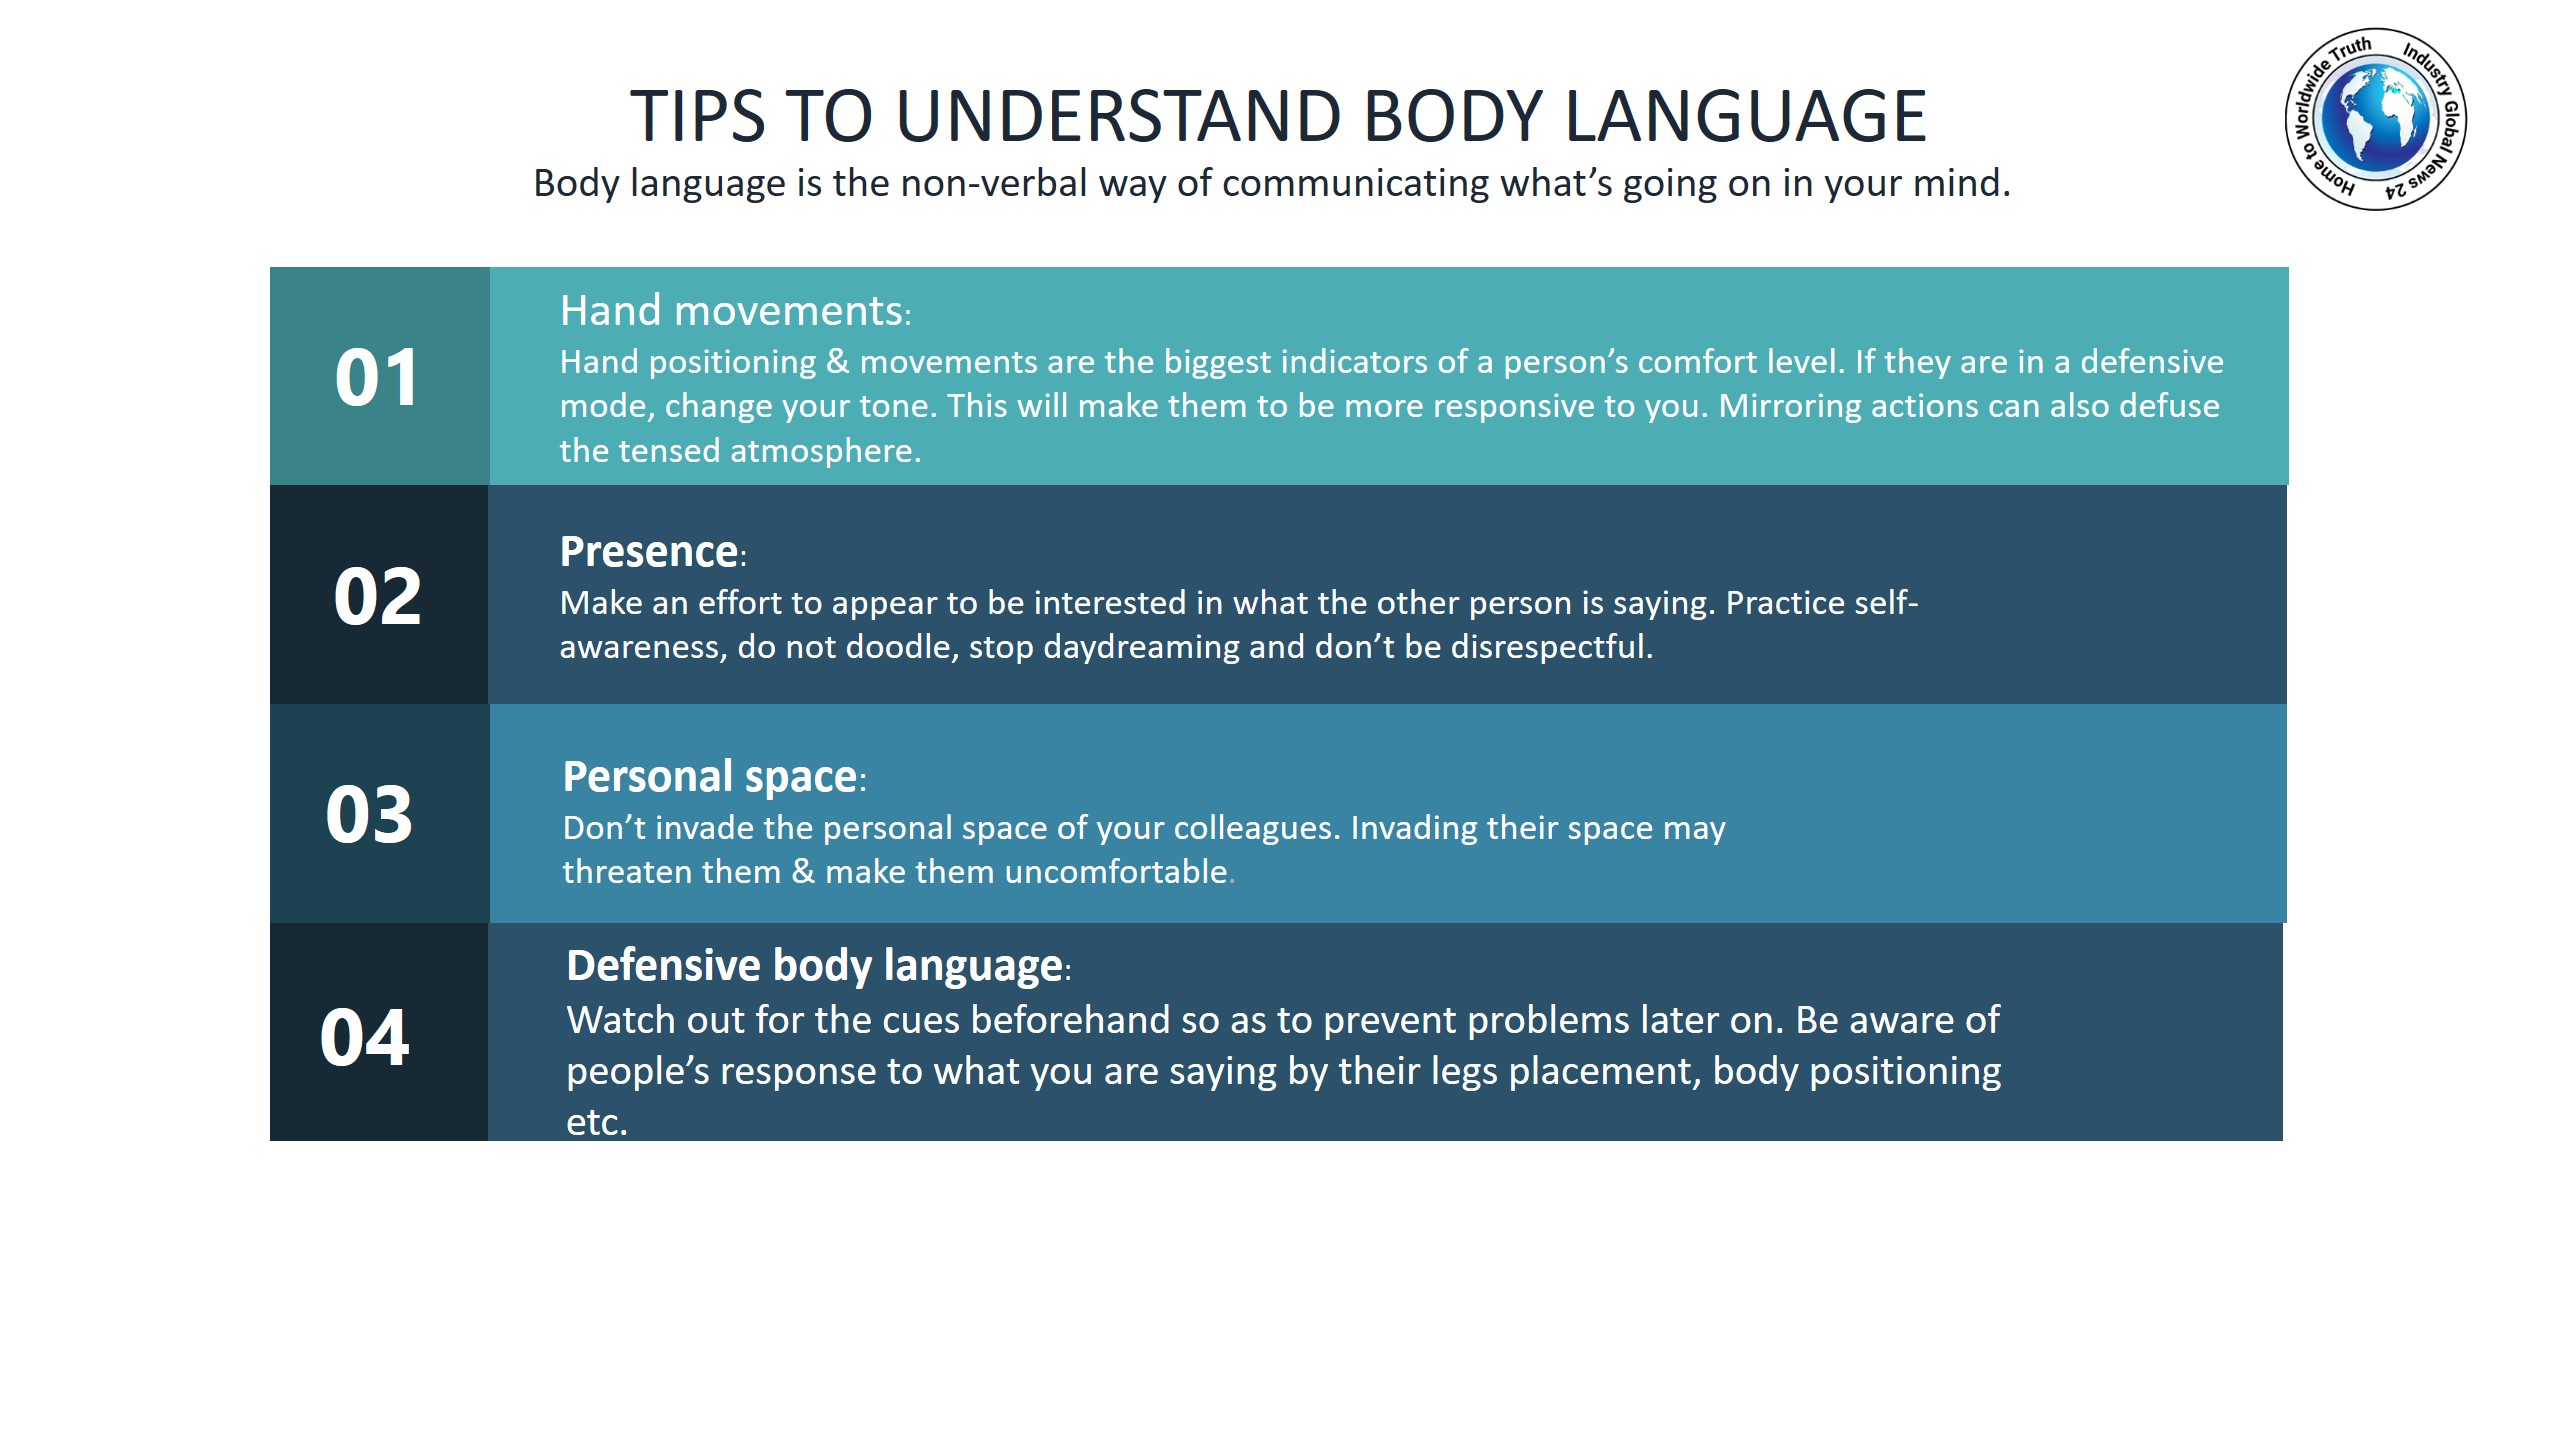 Tips to understand body language